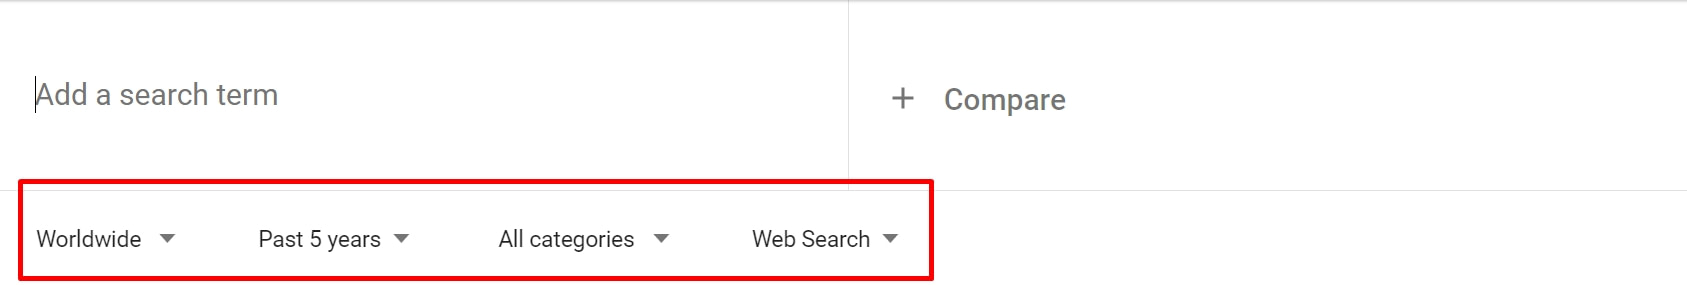 search options in Google Trends